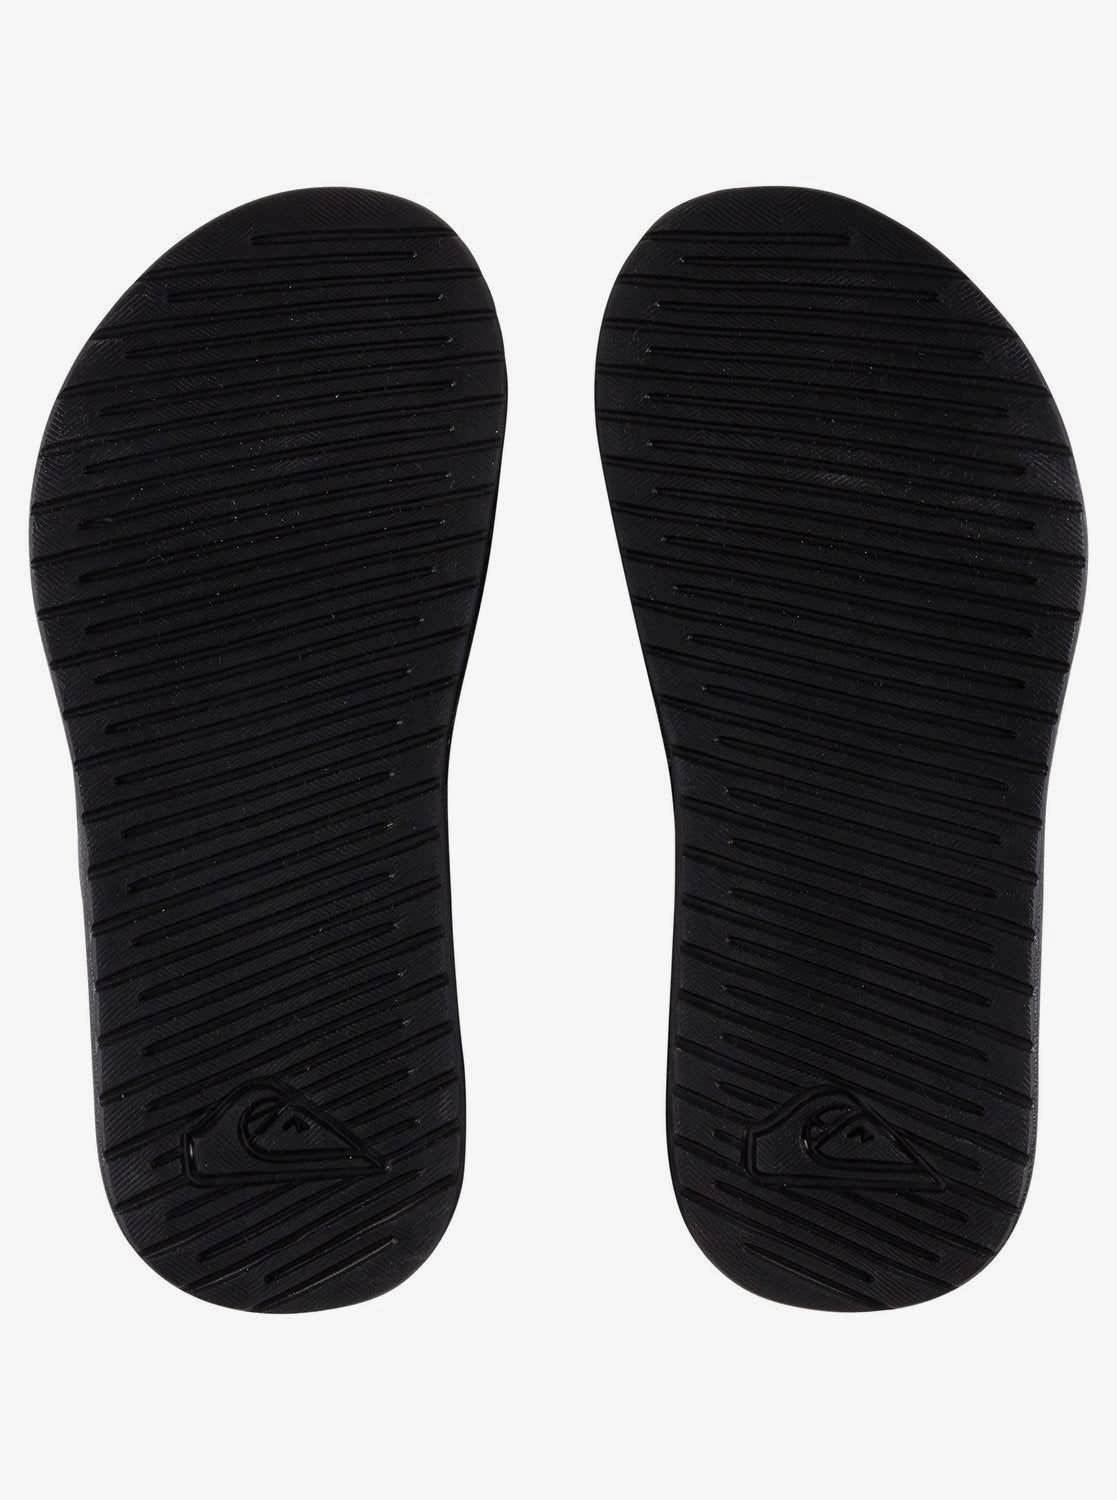 Quiksilver Boys' Bright Coast Adjustable Sandals - Mountain Kids Outfitters: Black Color - White Background  sole area